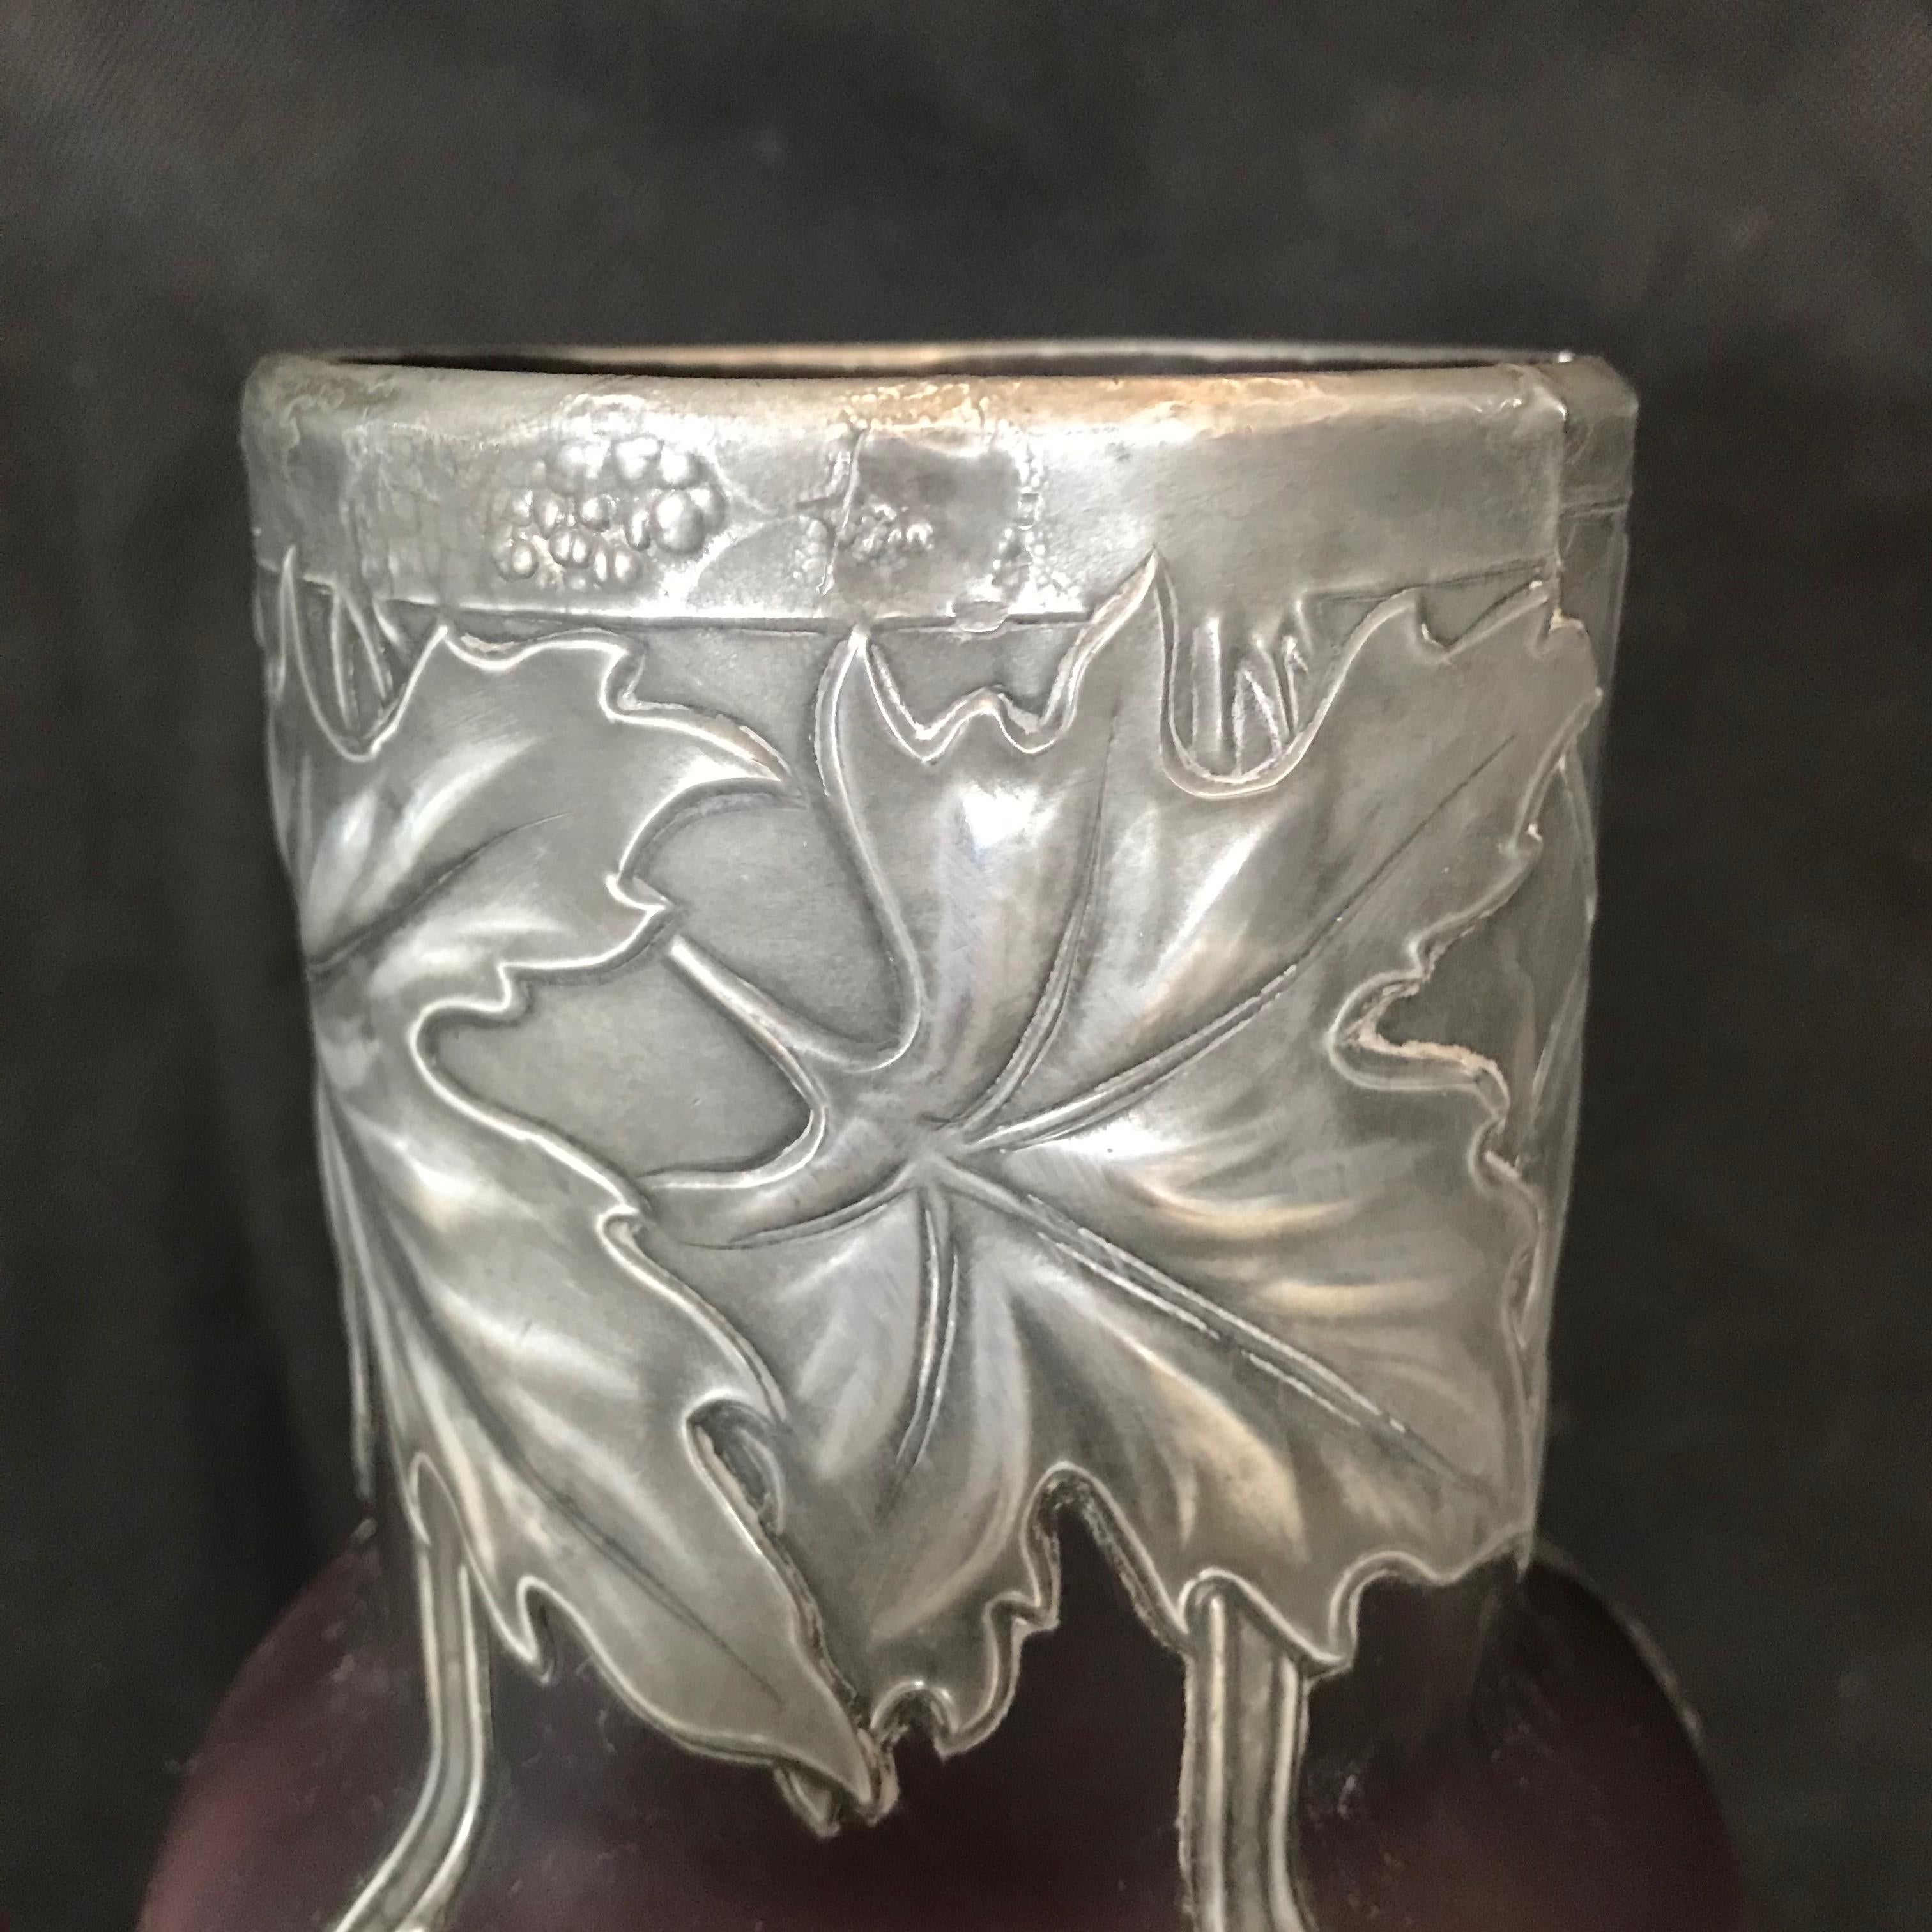 A French pewter mounted opalescent violet glass vase. Art Nouveau style frosted pale violet opalescent art glass set with floral and berry metal overlay and central monogram. Opening at top 3 5/8